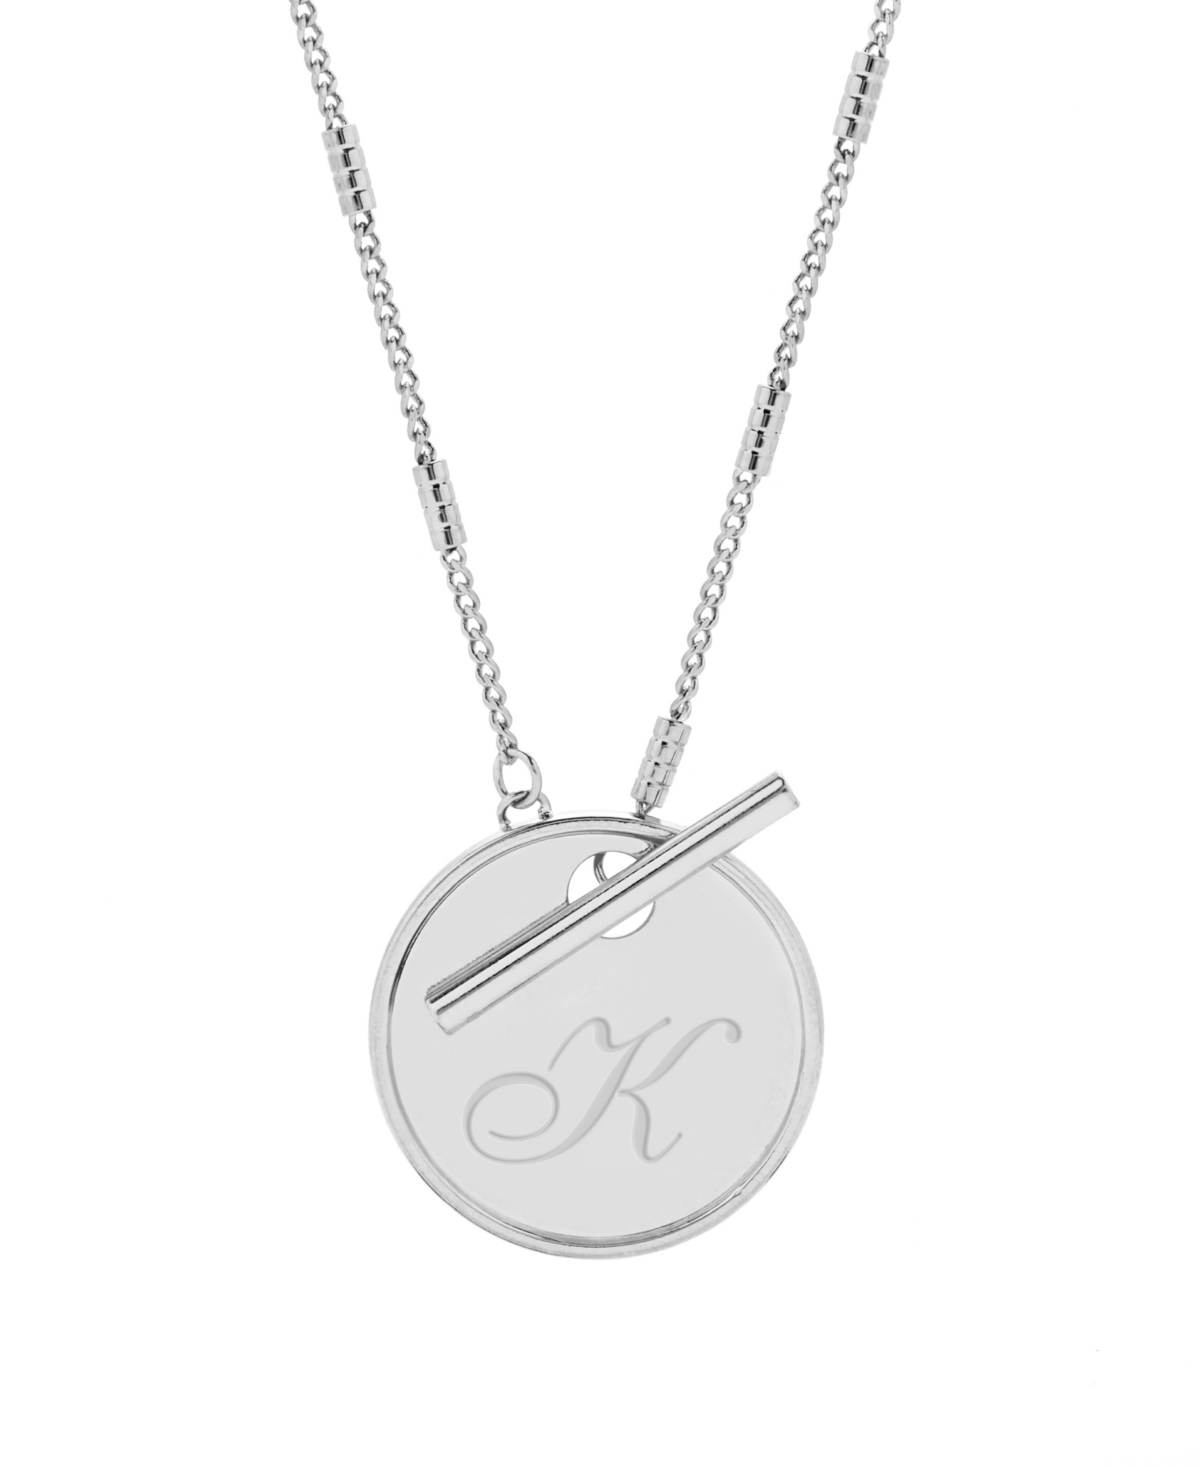 Brook & York Grace Initial Toggle Necklace